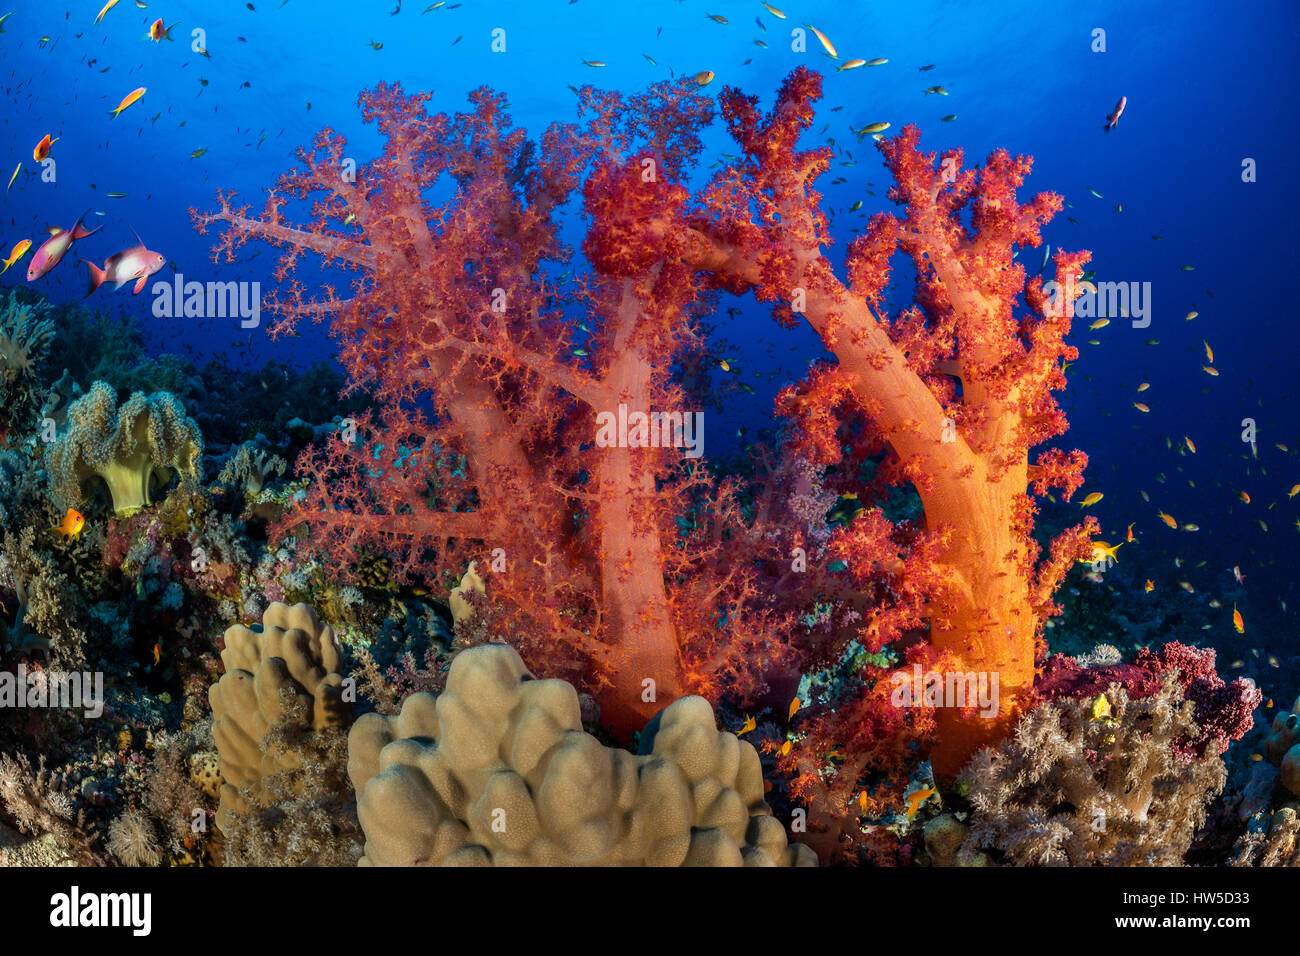 Red soft Coral, Dendronephthya sp., Elphinstone Riff, Rotes Meer, Ägypten Stockfoto